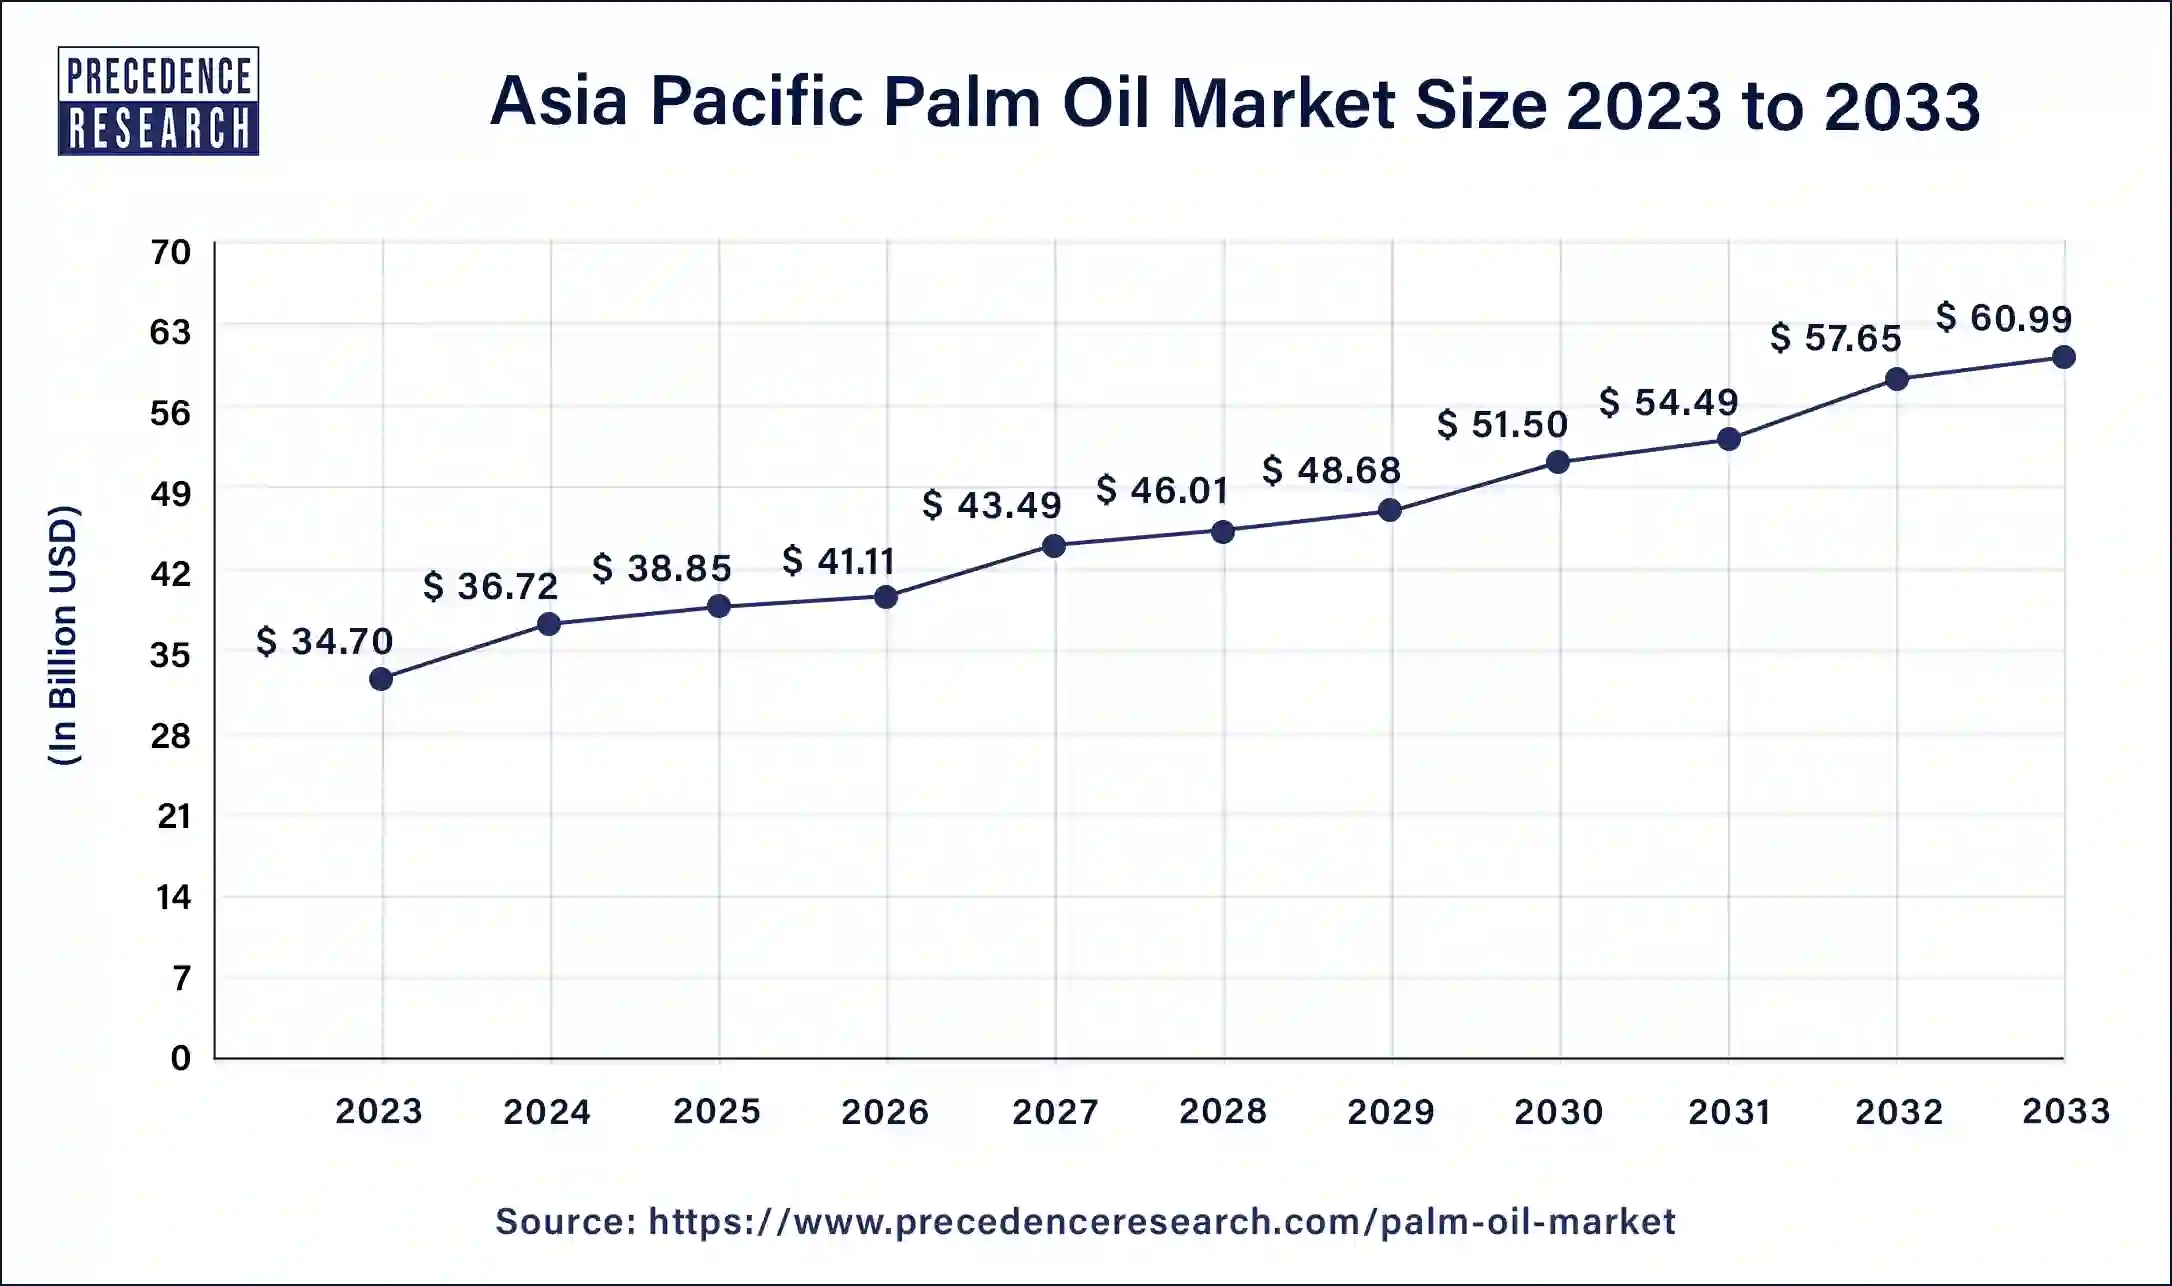 Asia Pacific Palm Oil Market Size 2024 to 2033